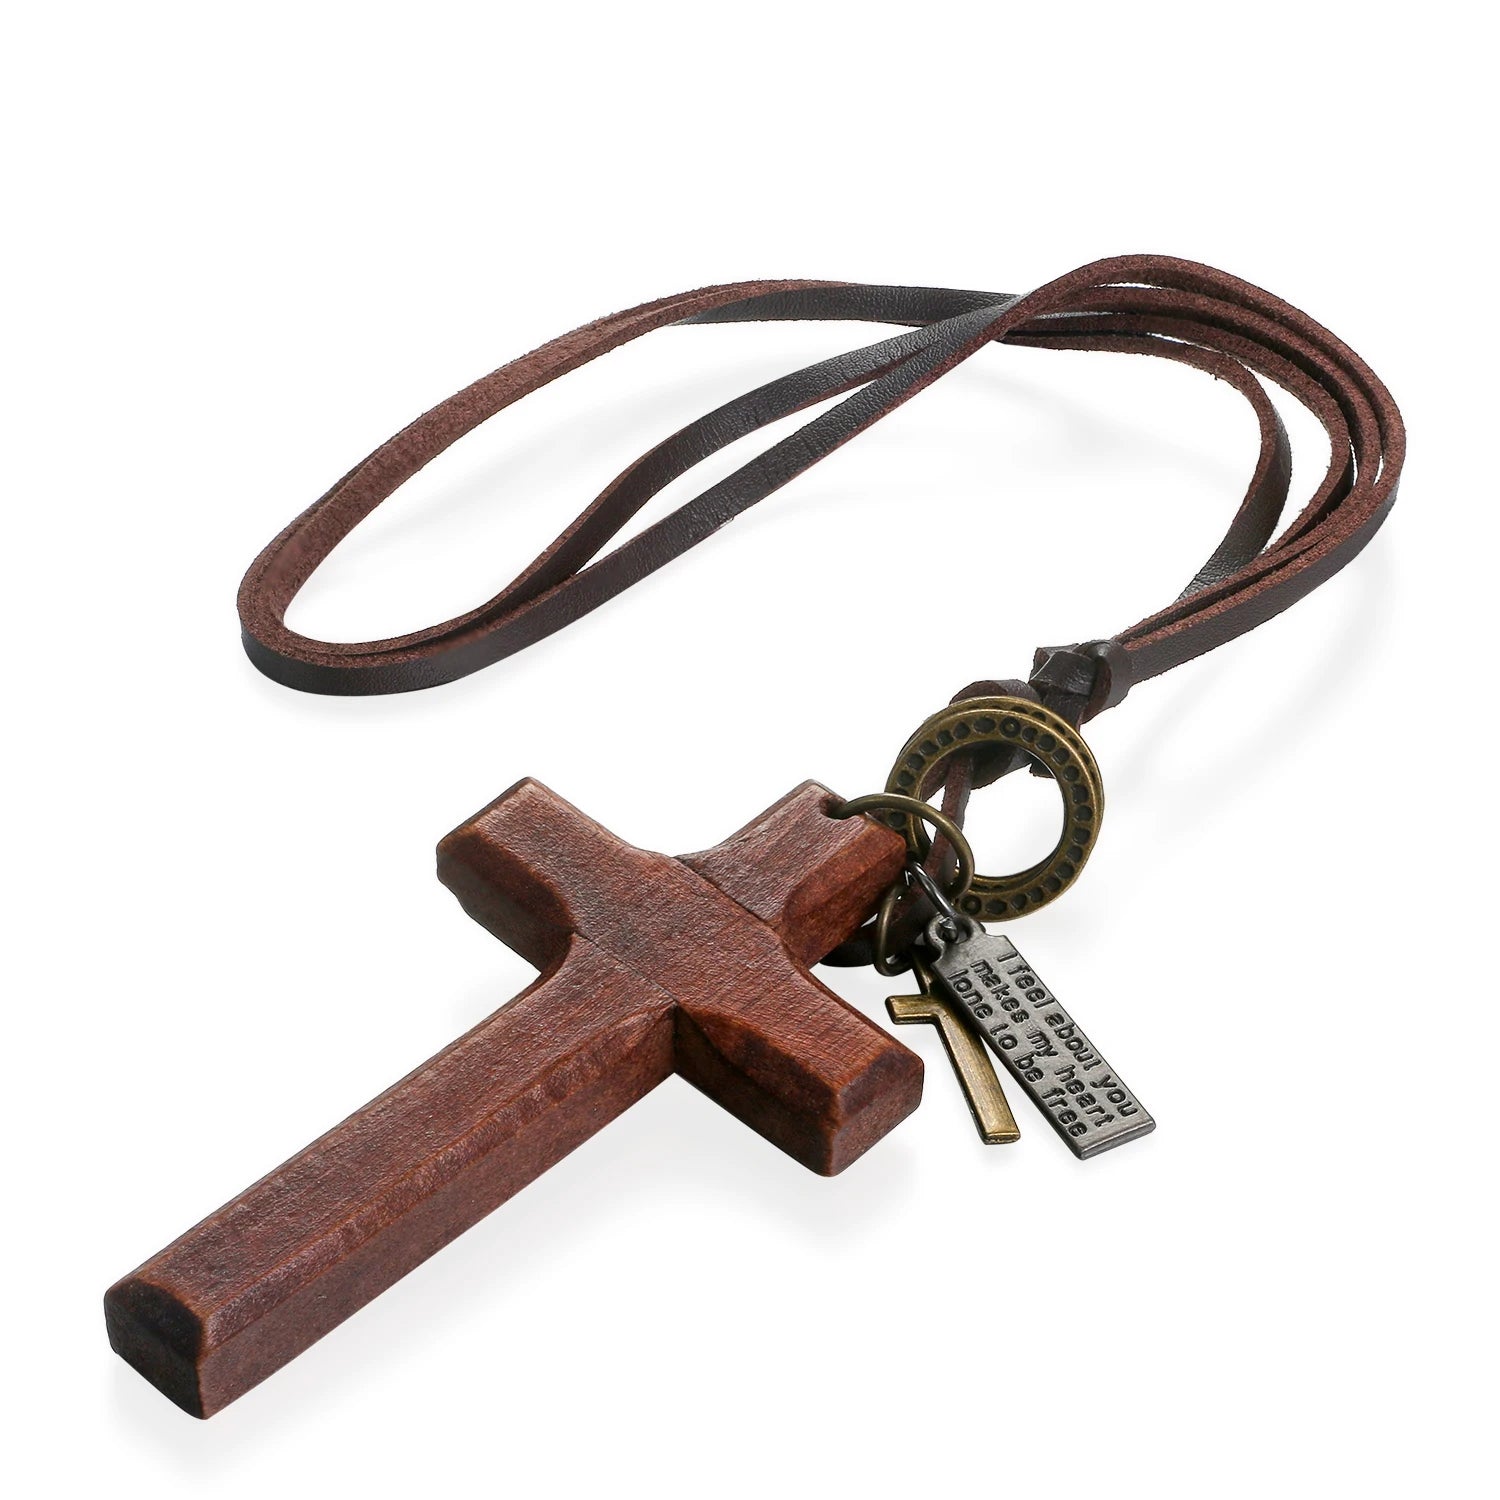 Vintage Wooden Cross / Crucifix Necklace for Men and Women with Adjustable Rope